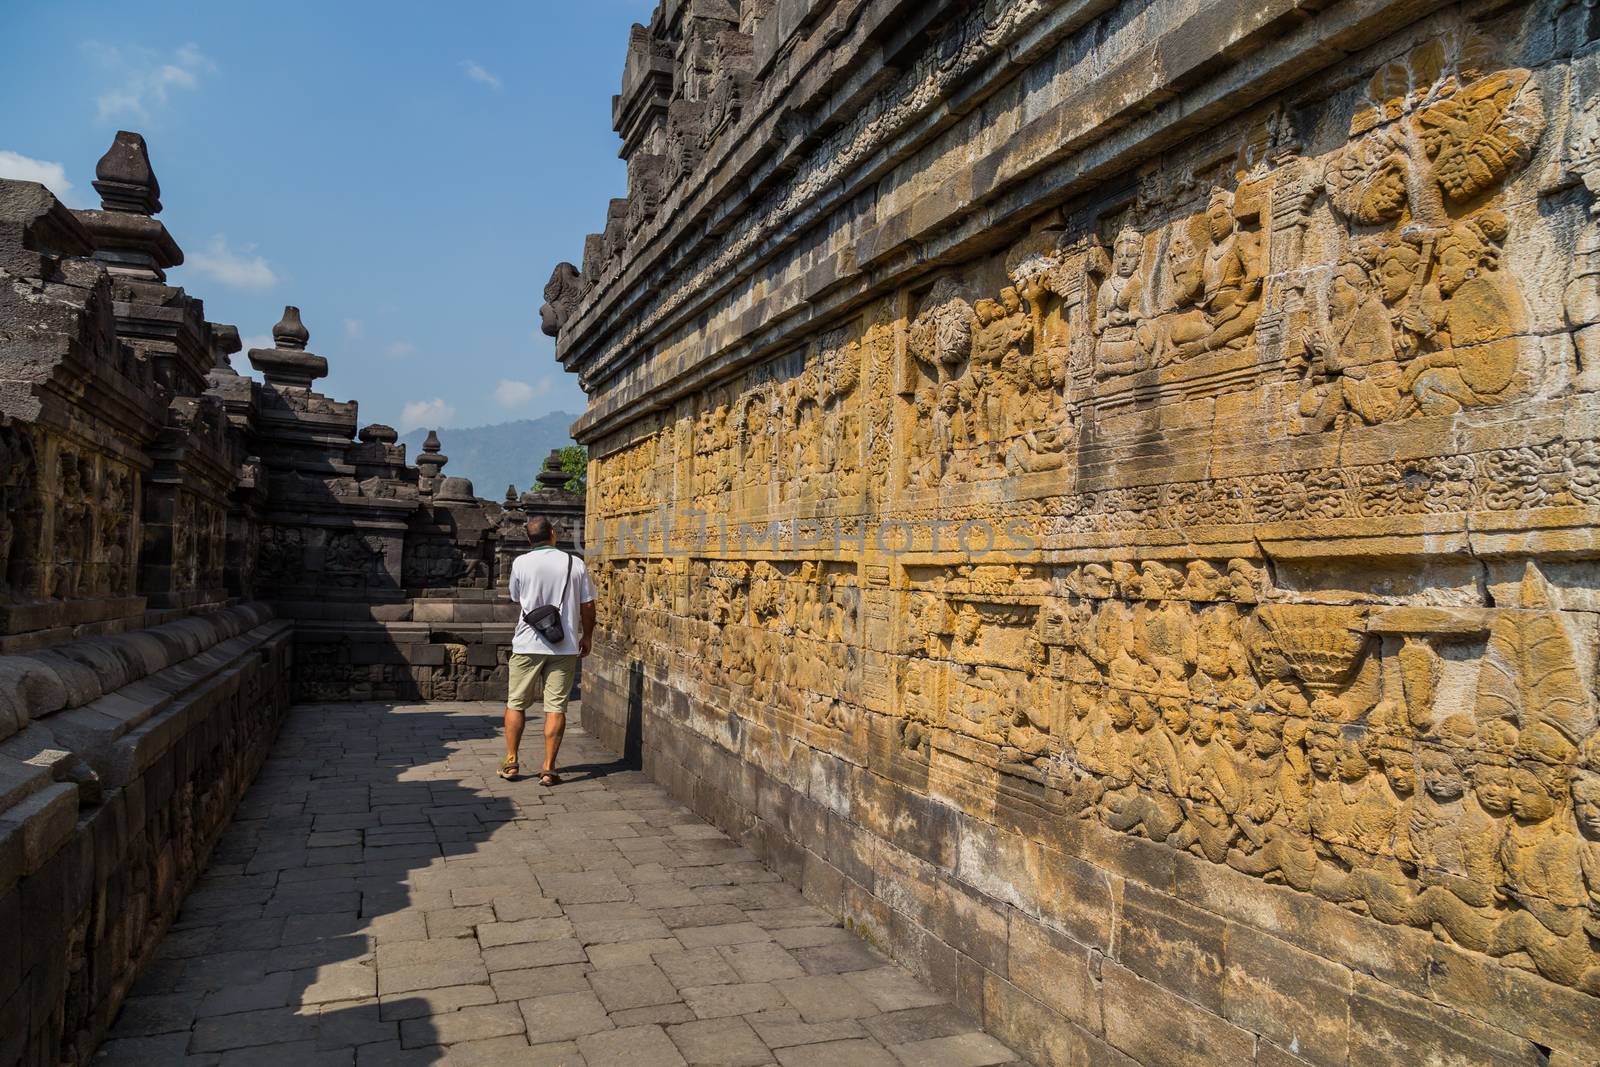 Man walking in the ancient Buddhist temple of Borobudur, in Magelang, Central Java, Indonesia